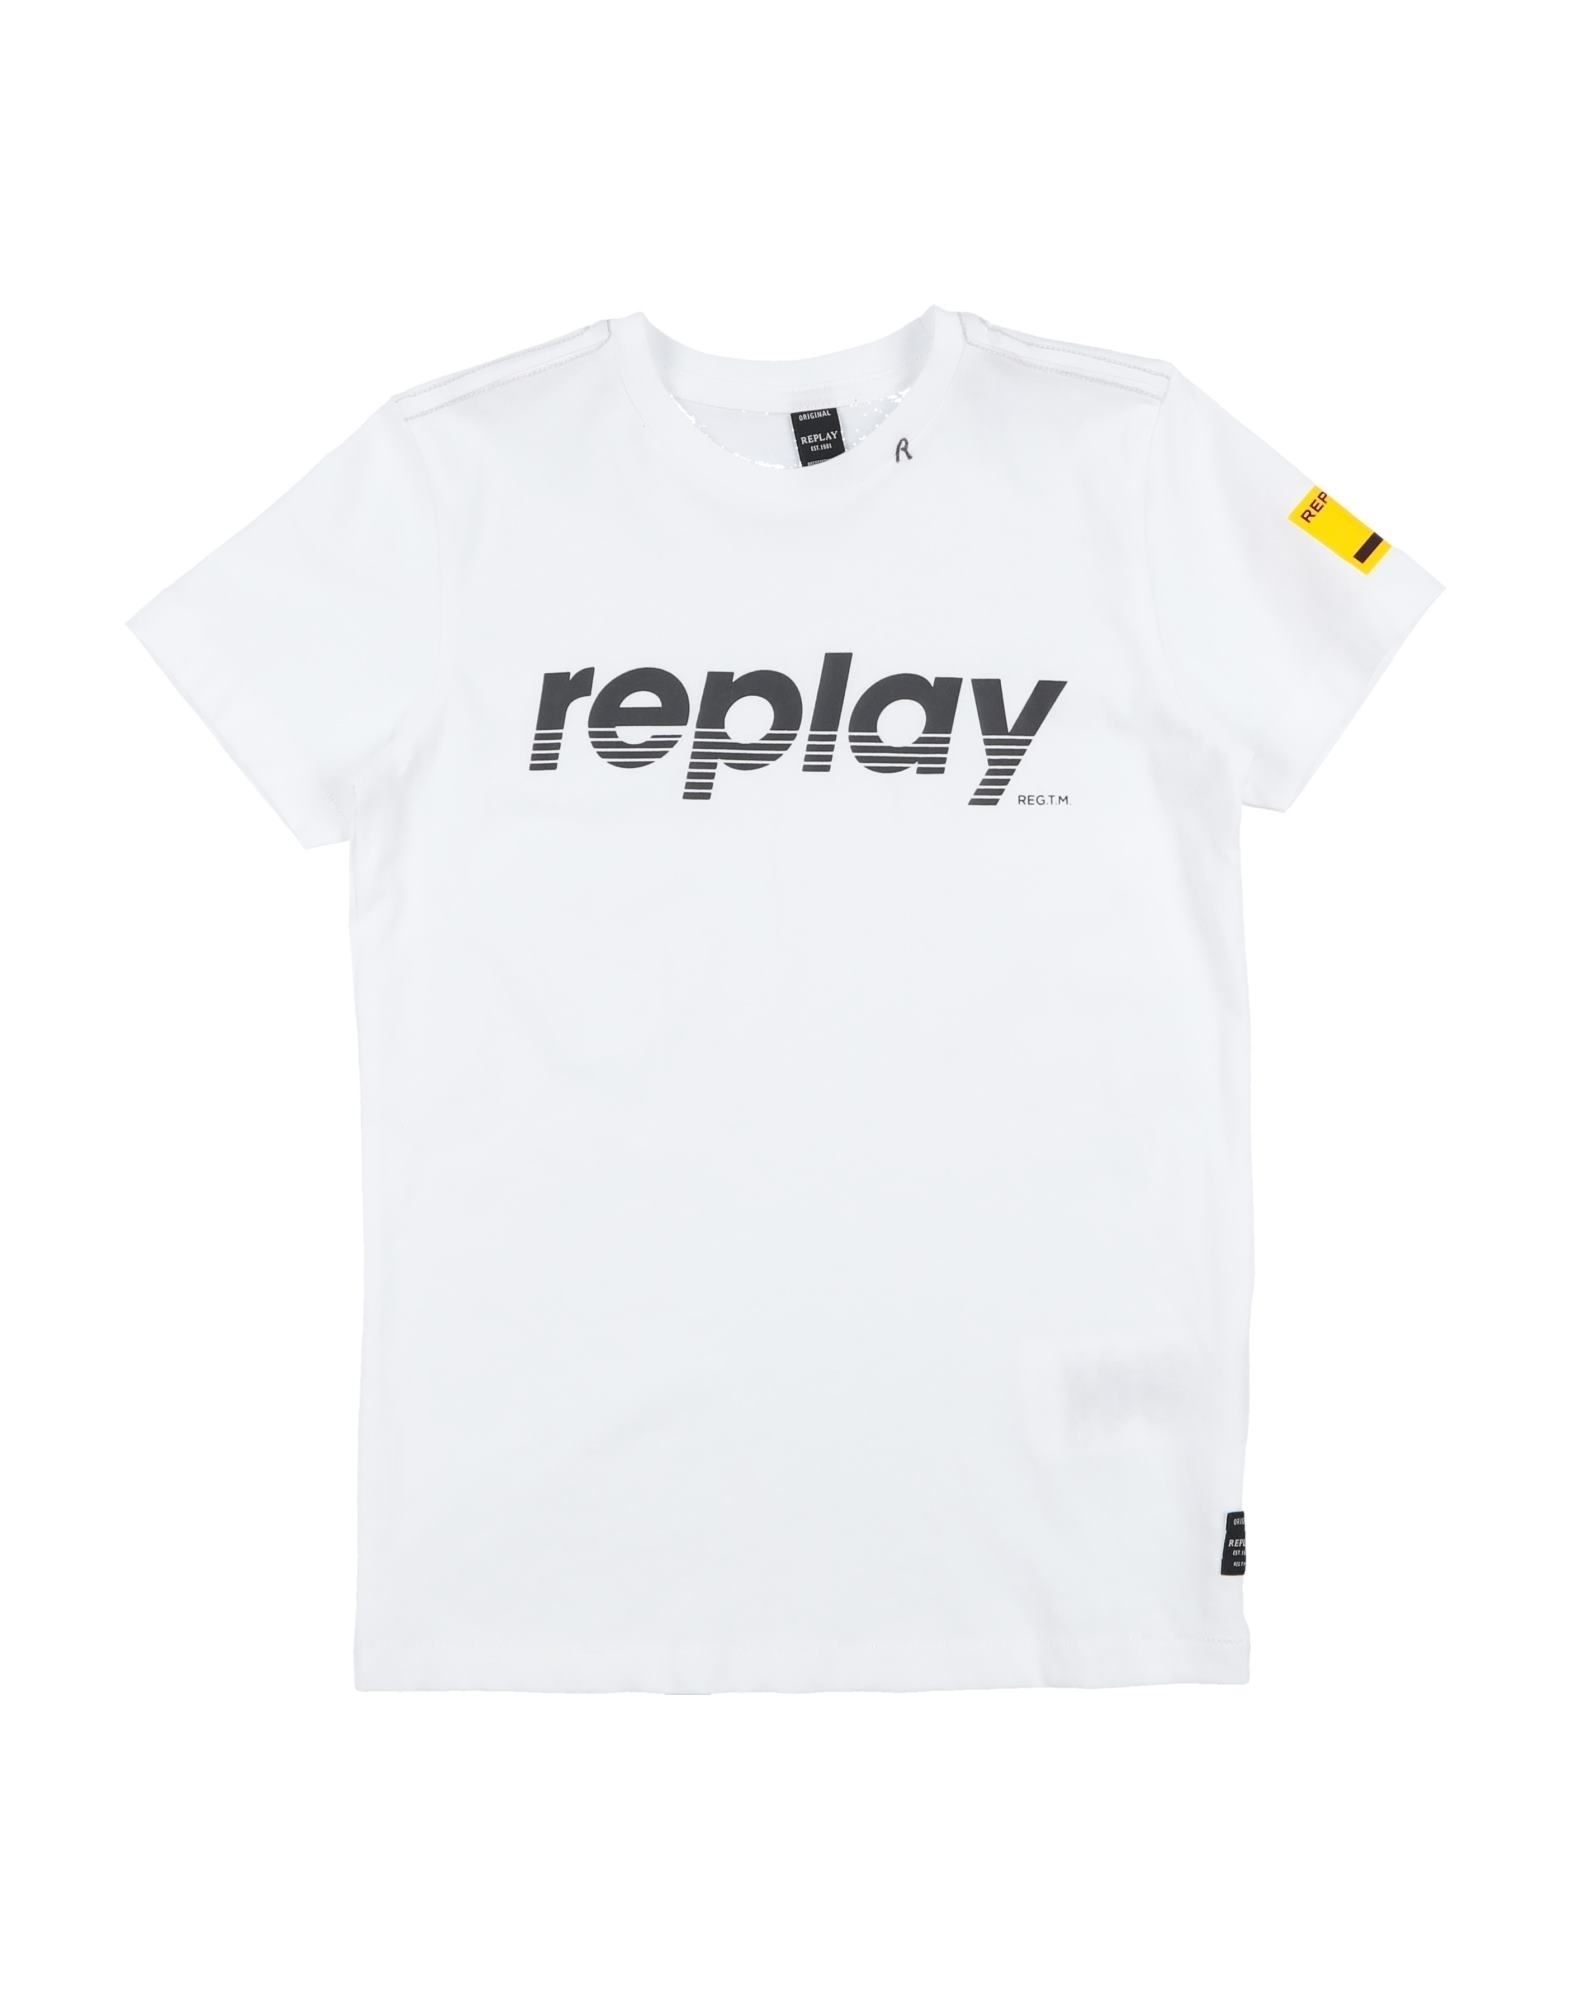 REPLAY & SONS T-shirts - Item 12535619